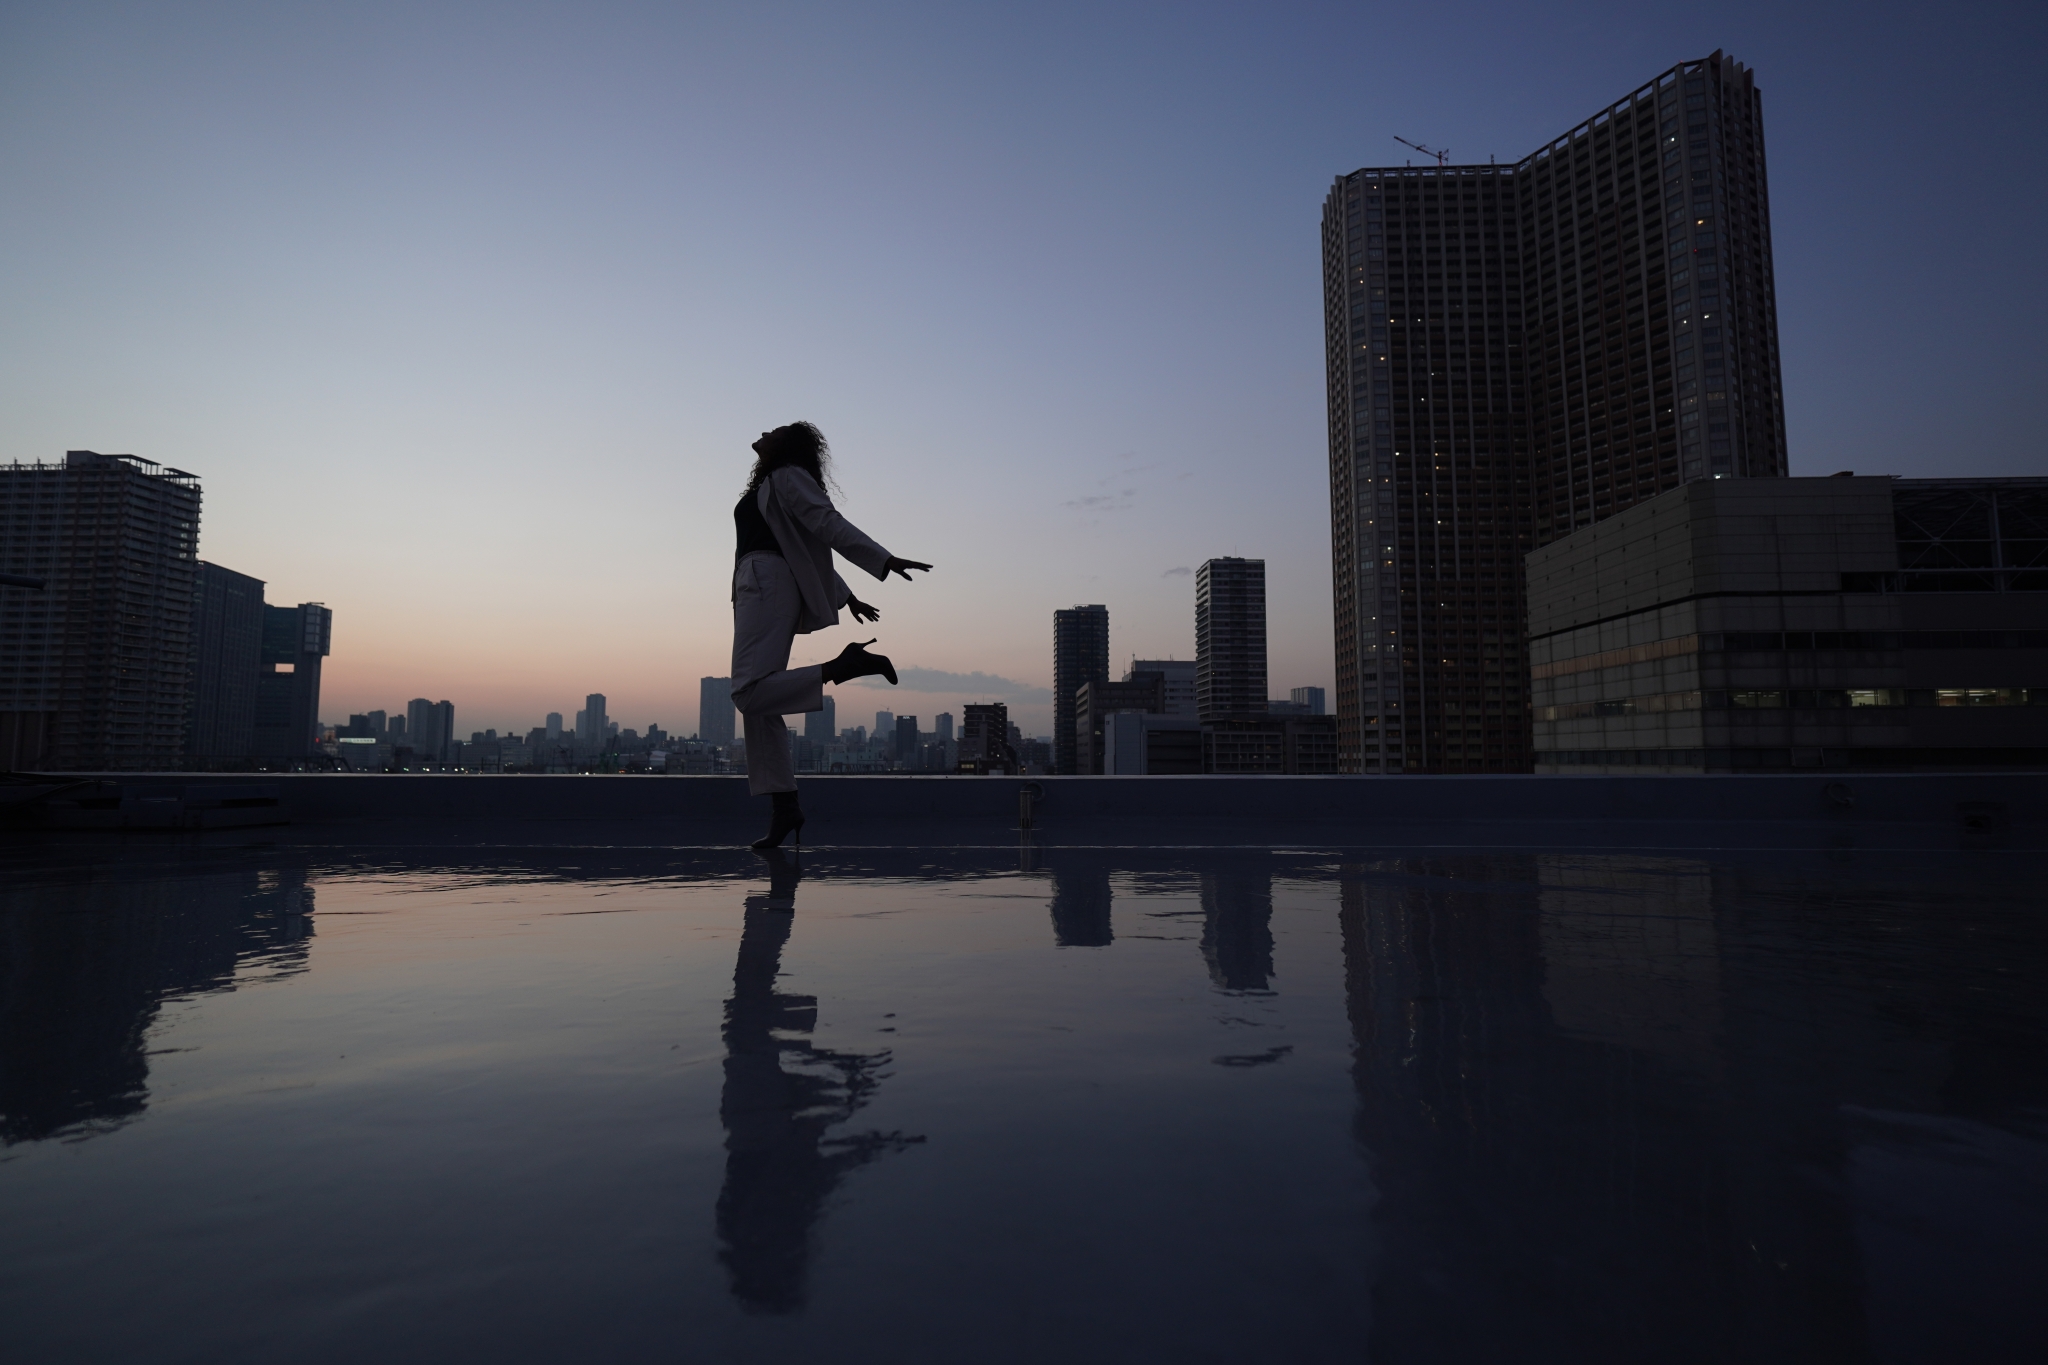 Female dancer at dusk by water in an urban setting, silhouetted against the sky 